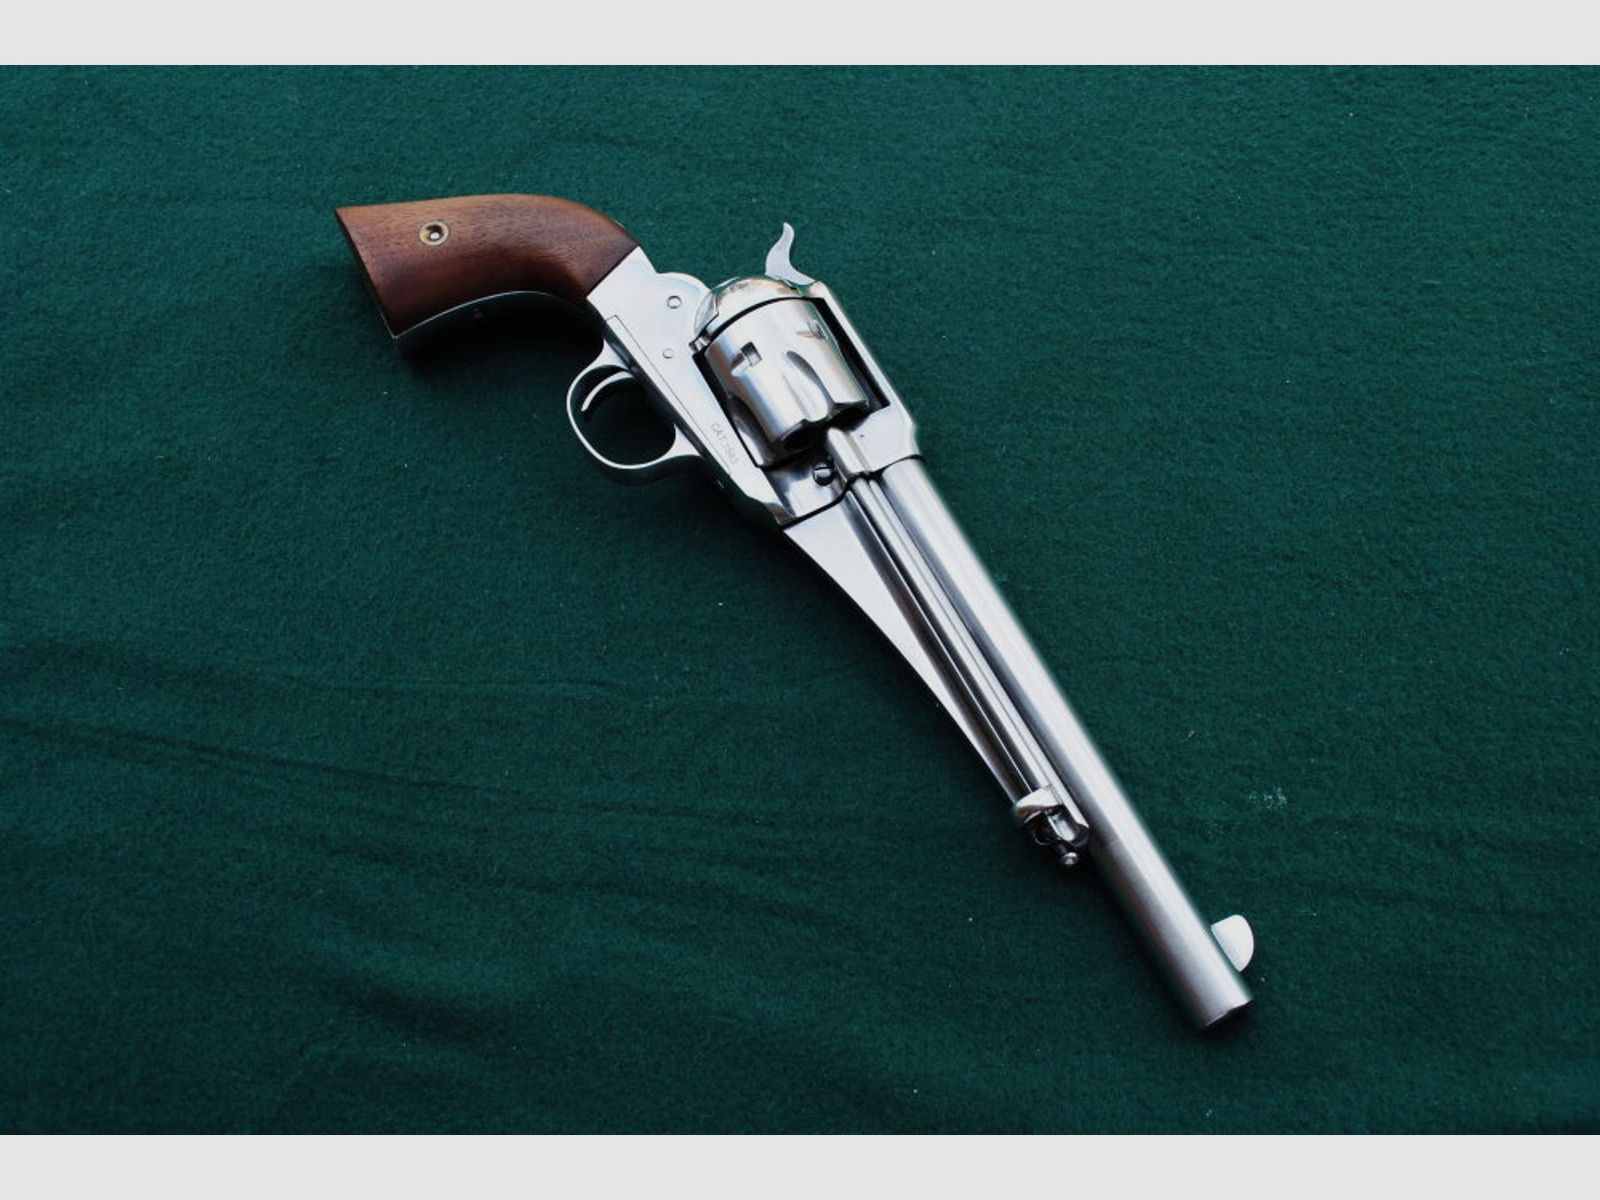 Hege Uberti Remington 1875 Outlaw, Hochglanz Stainless Steel